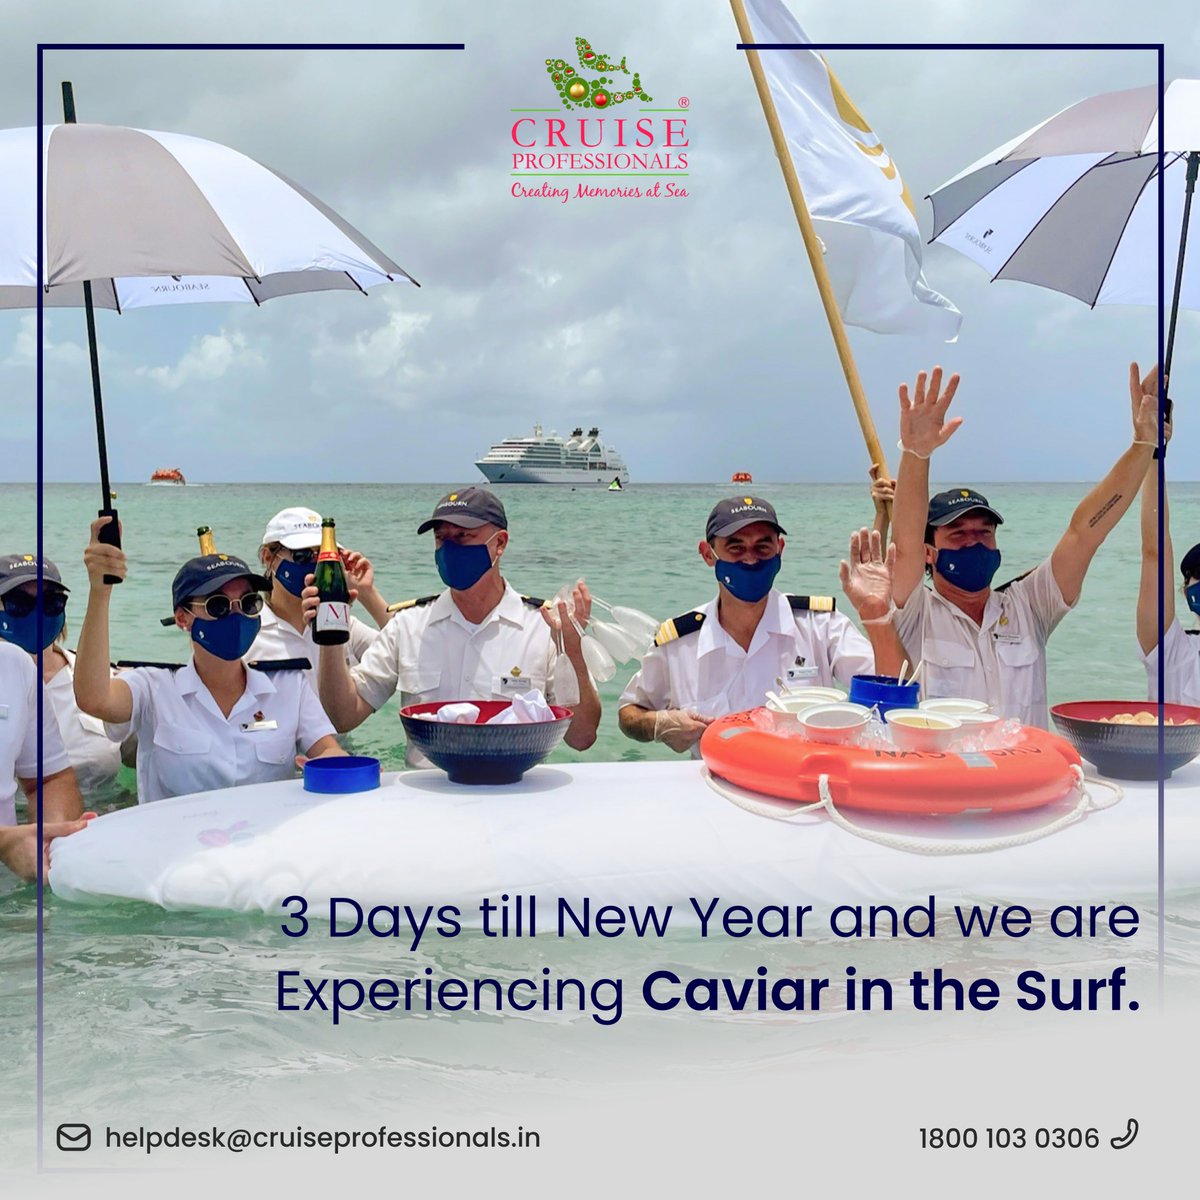 3 Days till New Year and we are experiencing Caviar in the Surf with Seabourn. 
#seabourn #cruiseprofessionals #luxurytravel #seabournmoments #seastheday #cruising #newyears #christmas2022